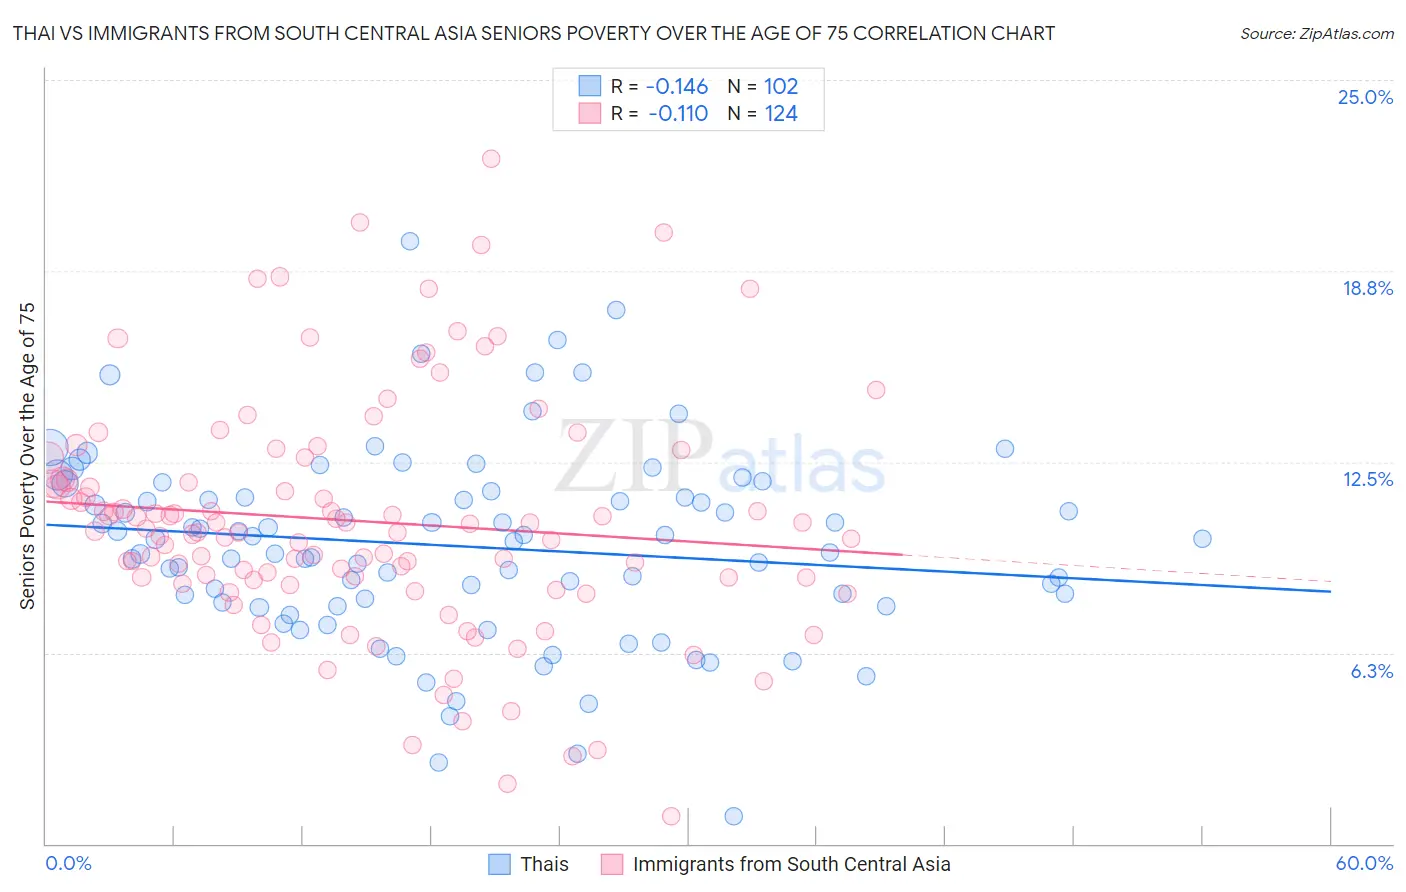 Thai vs Immigrants from South Central Asia Seniors Poverty Over the Age of 75